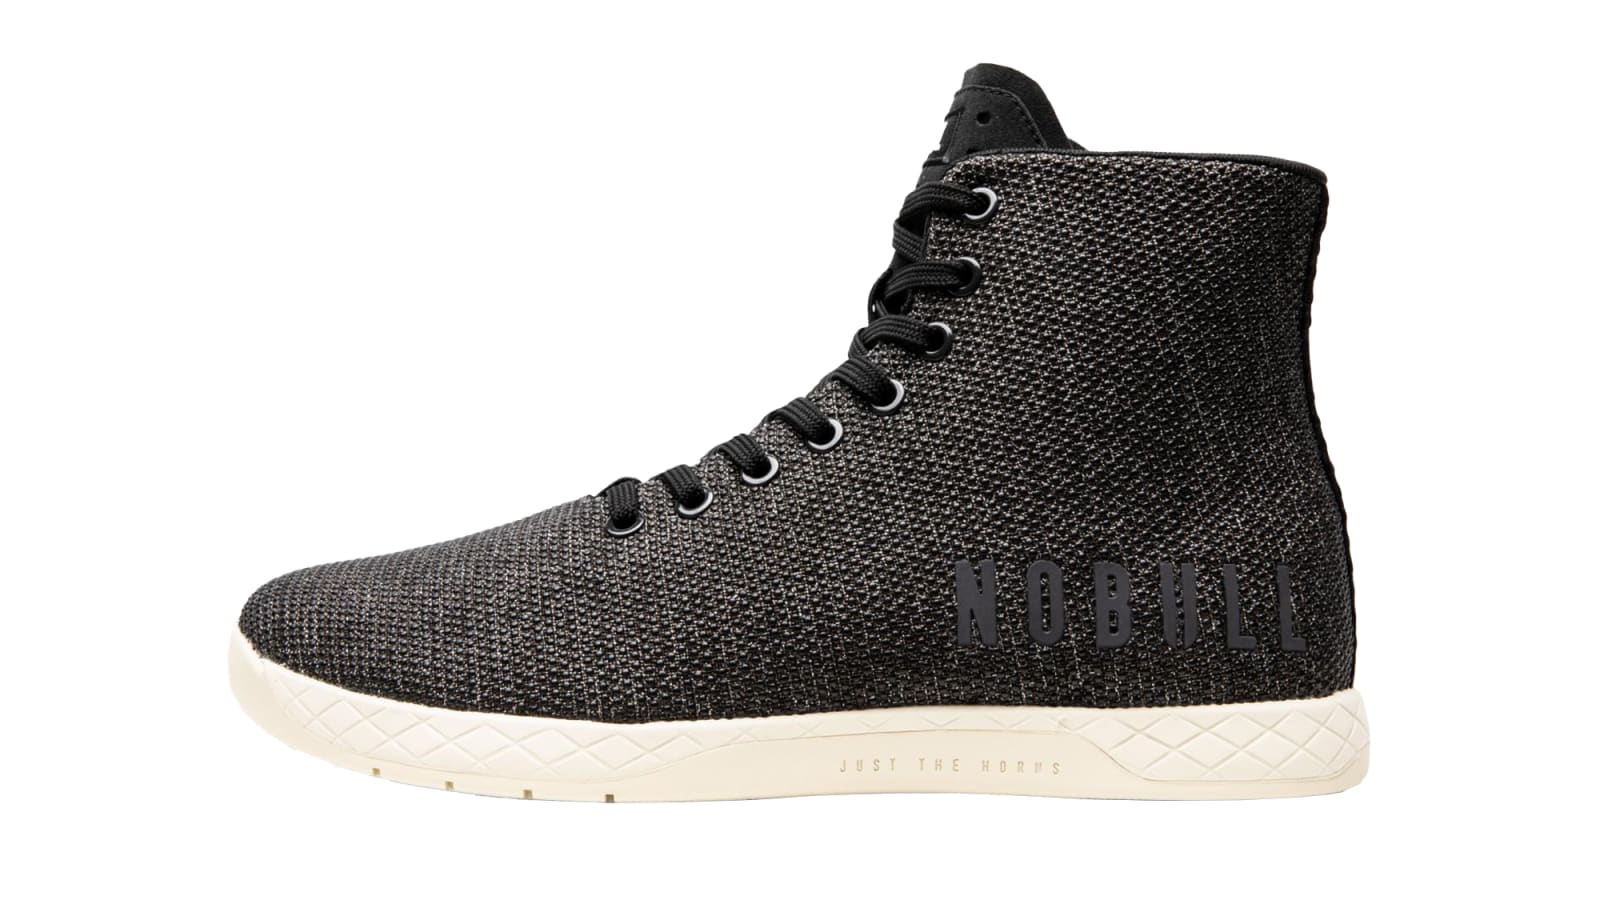 NOBULL High-Top Trainer - Black Heather / Off White | Rogue Fitness UK